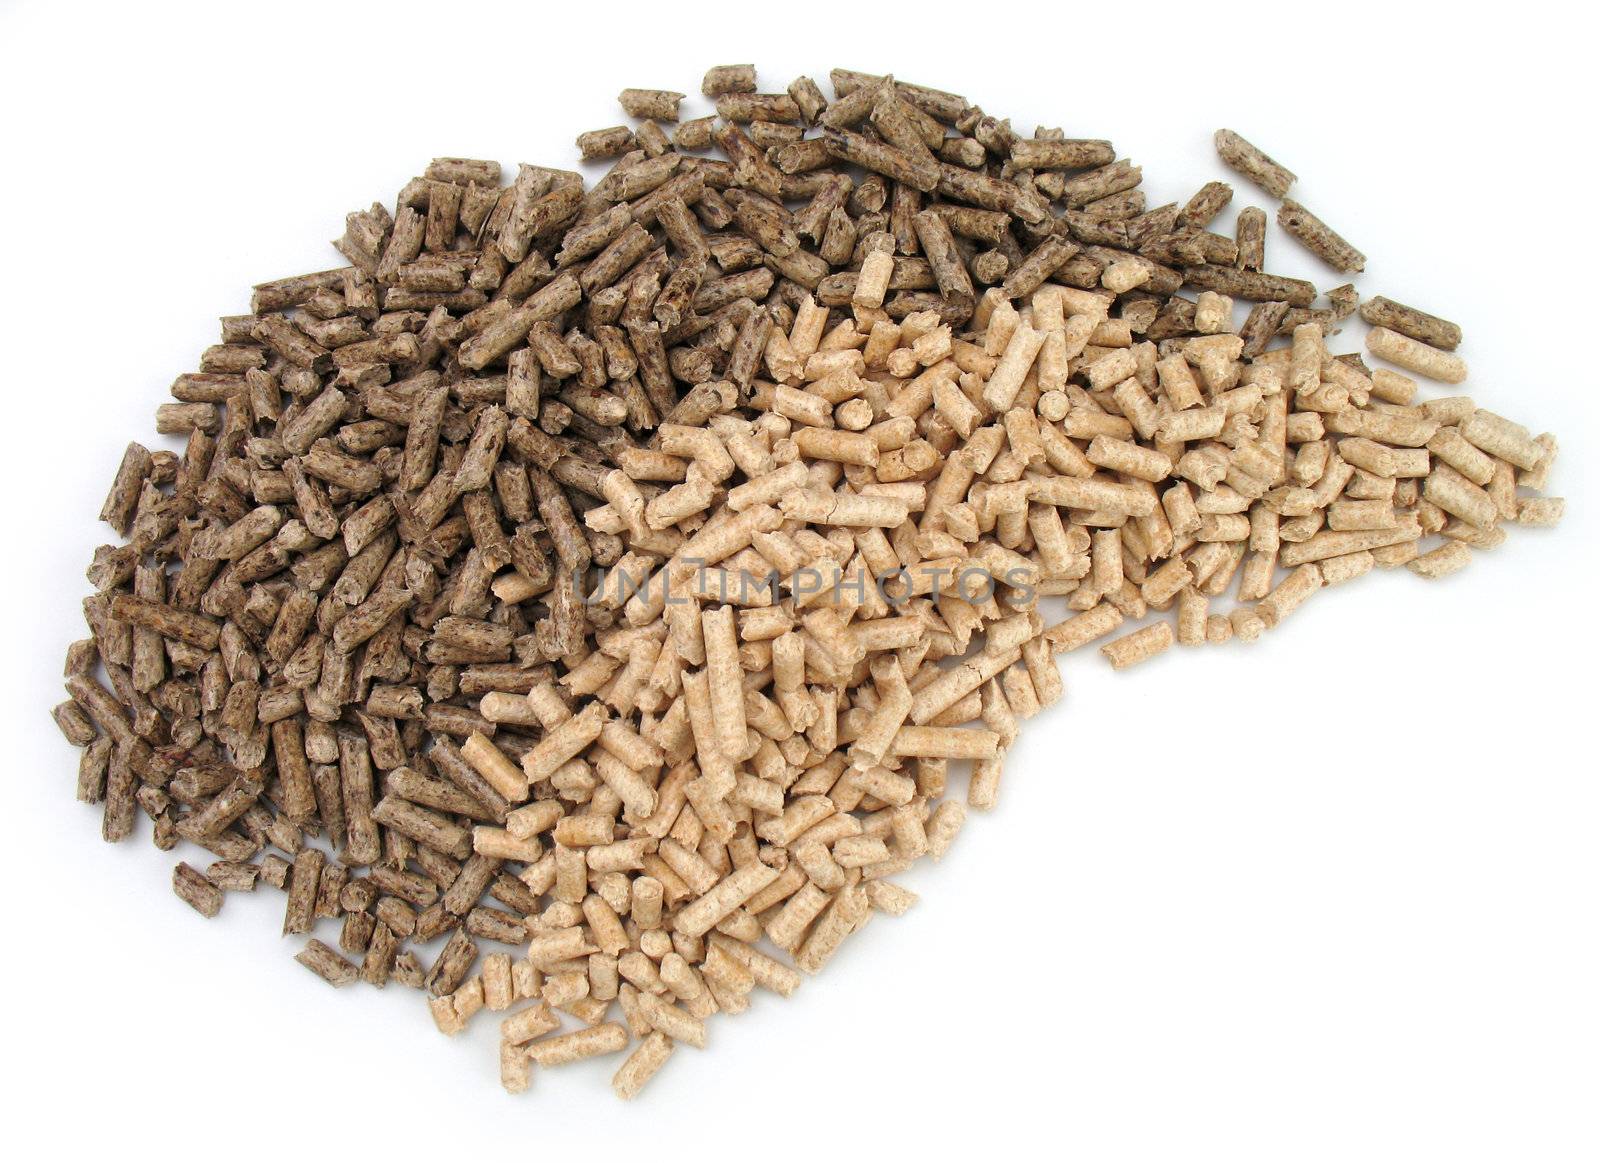 wood pellets for fireplaces and stoves